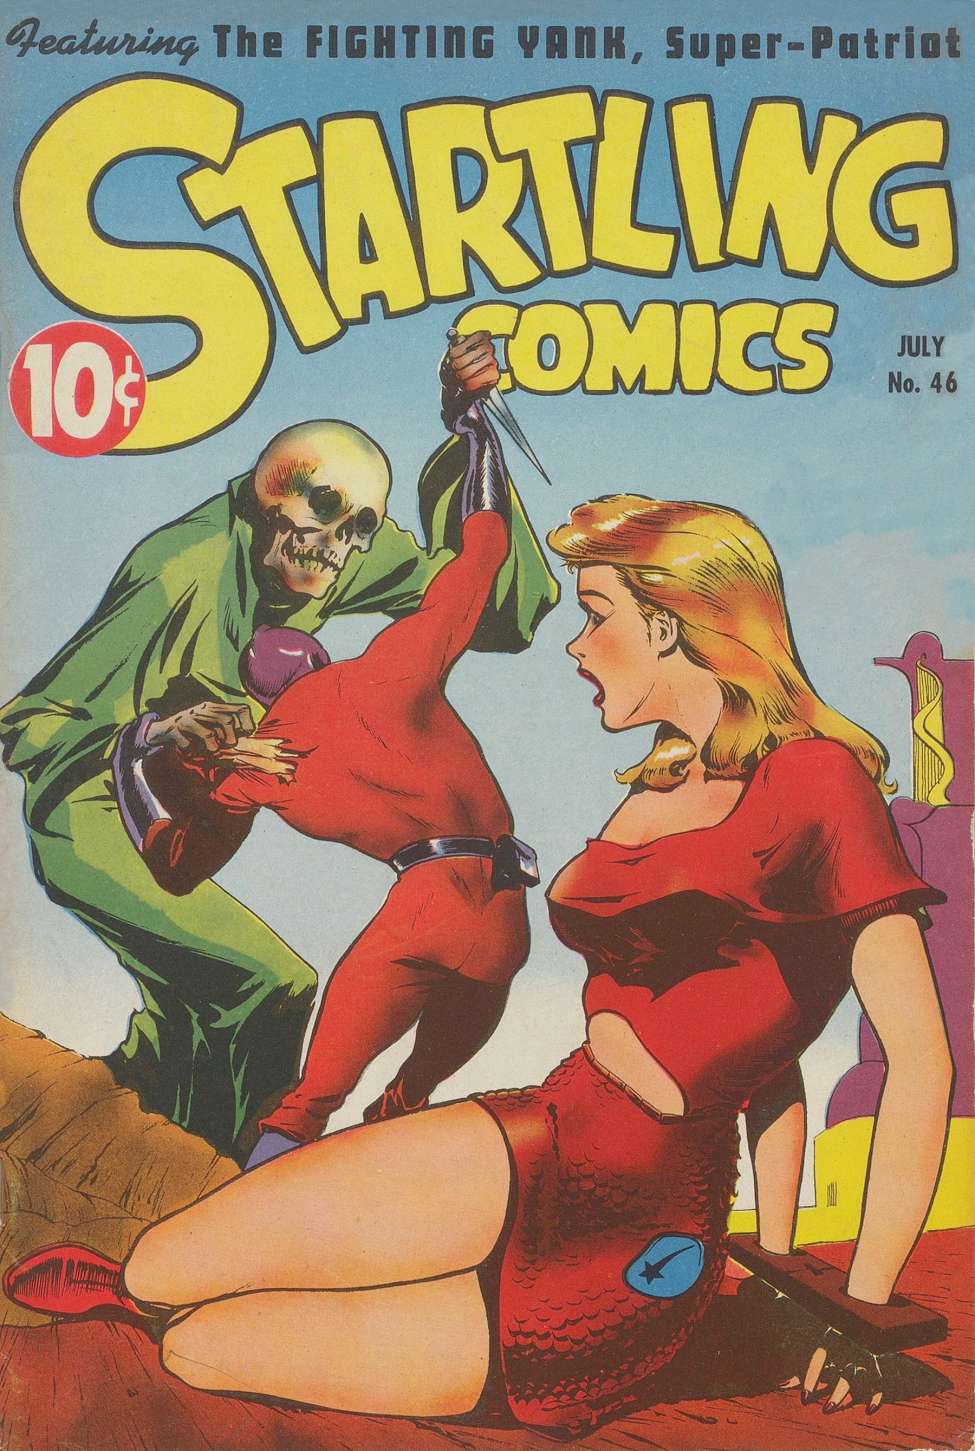 Book Cover For Startling Comics 46